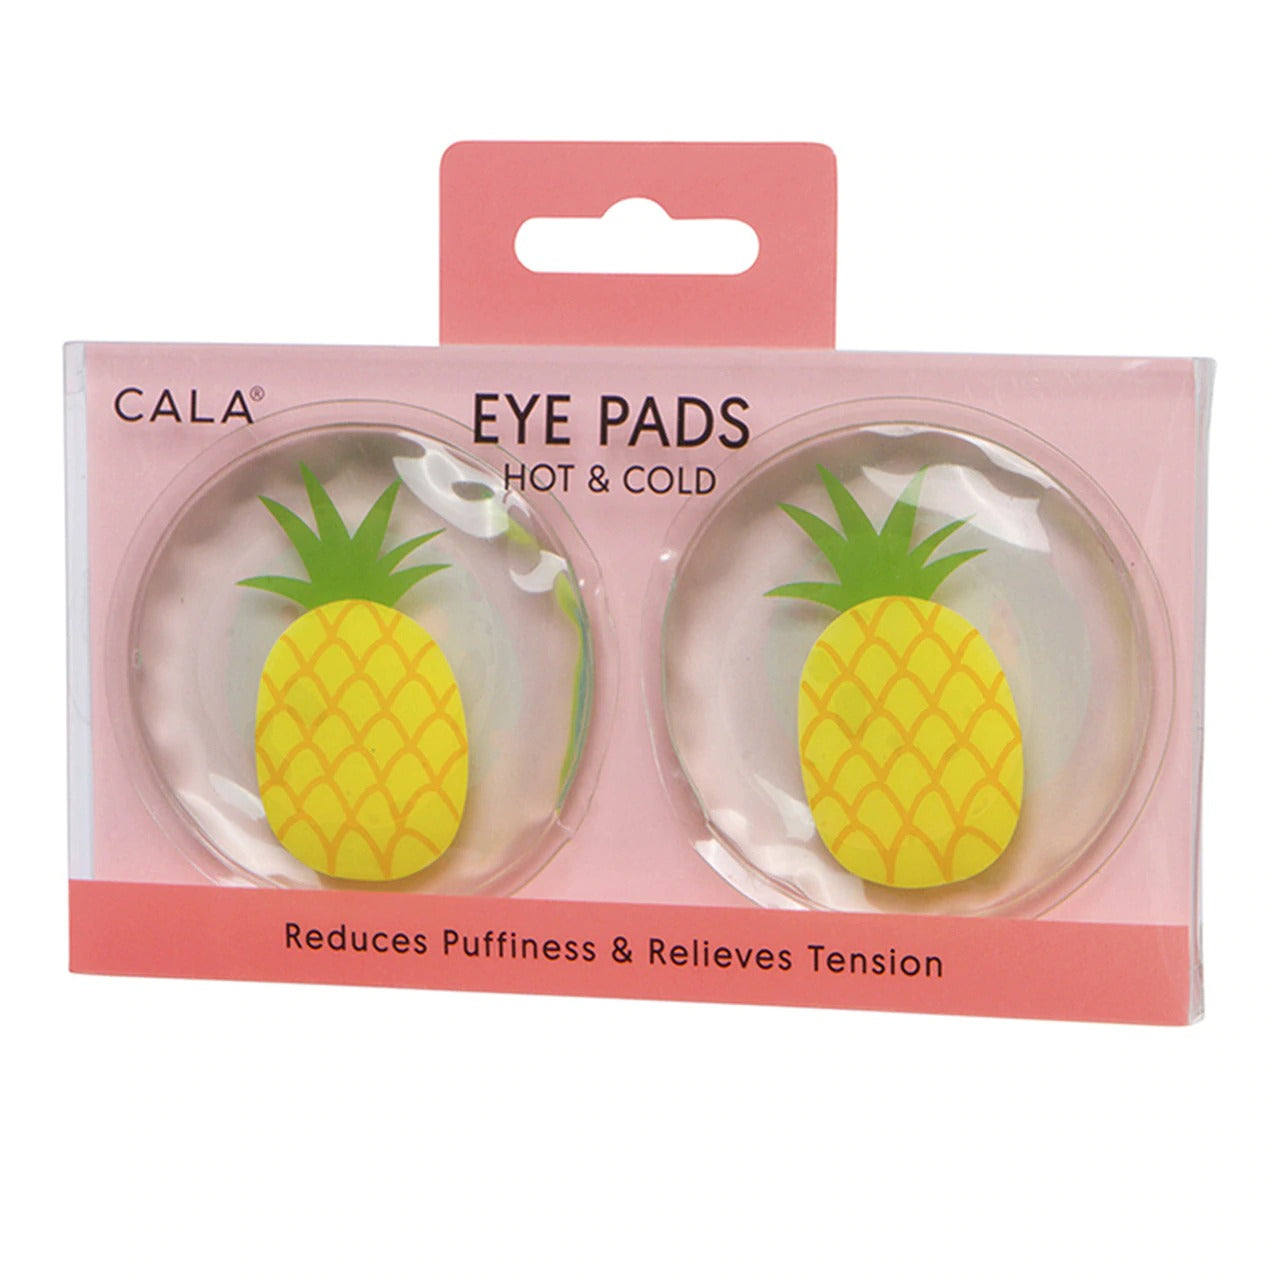 EYE PADS HOT & COLD - PINEAPPLE